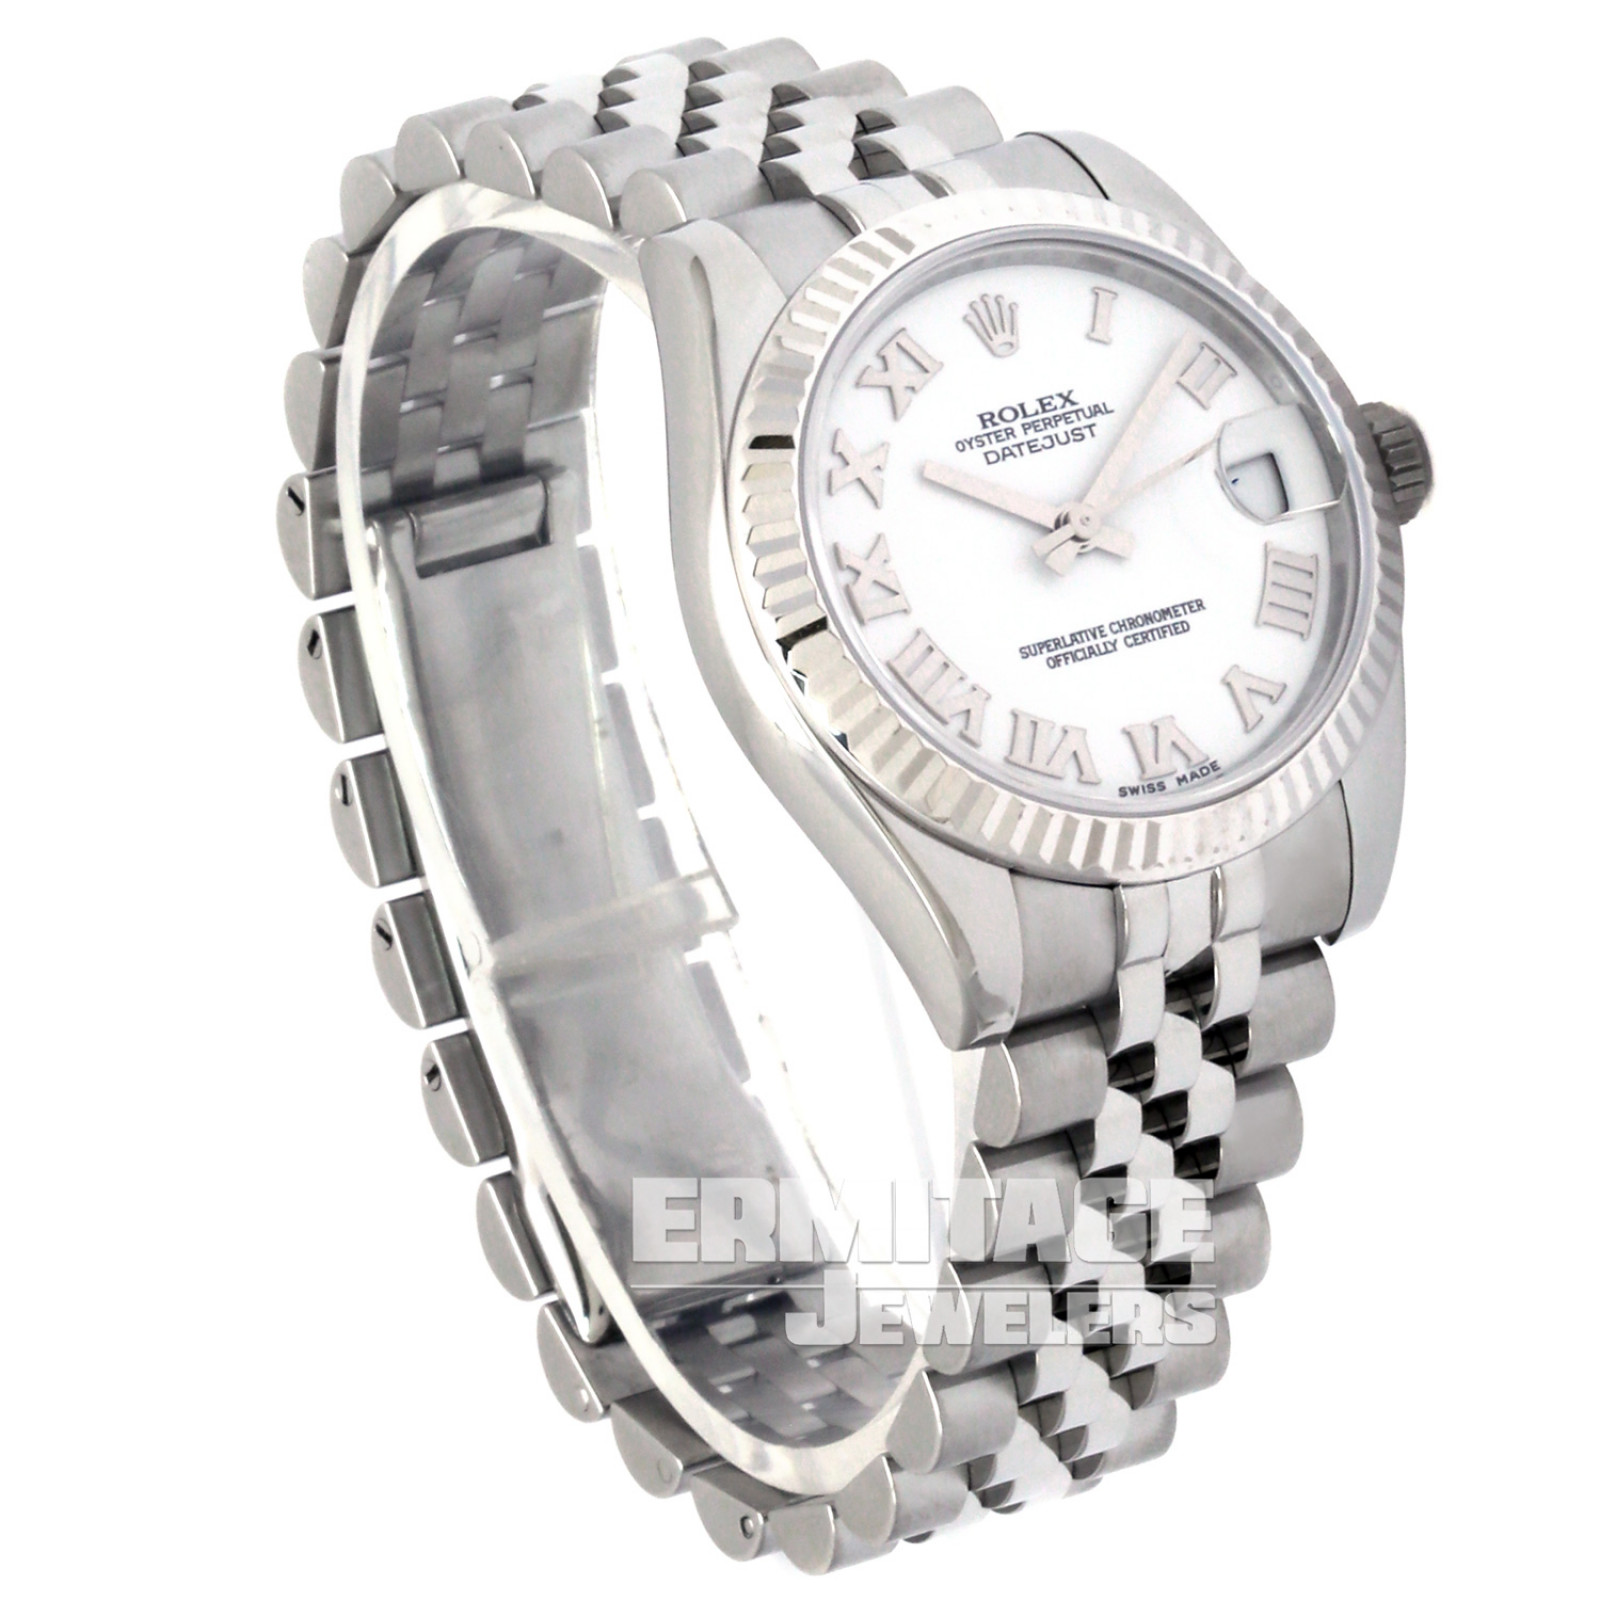 Rolex Datejust 178274 with White Dial